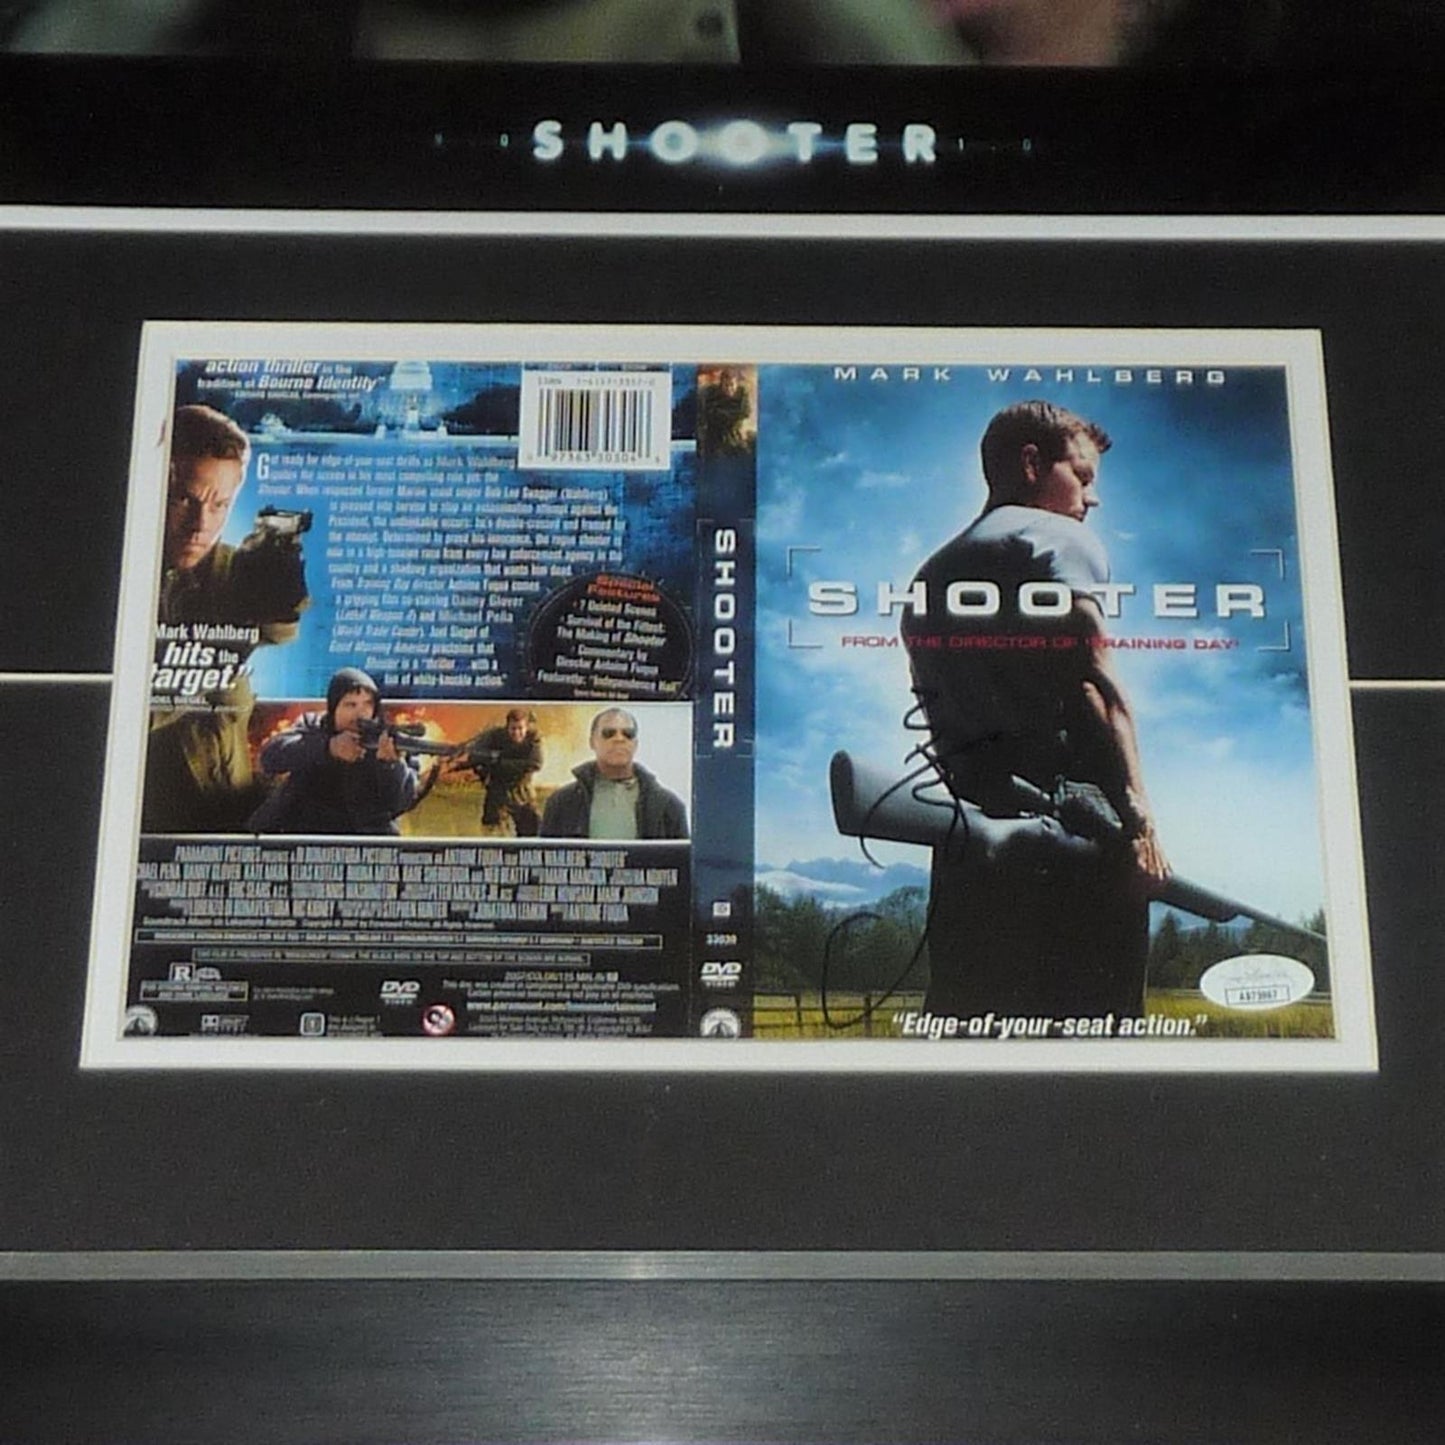 Shooter 11x17 Movie Poster Deluxe Framed with Mark Wahlberg Autographed DVD cover - JSA